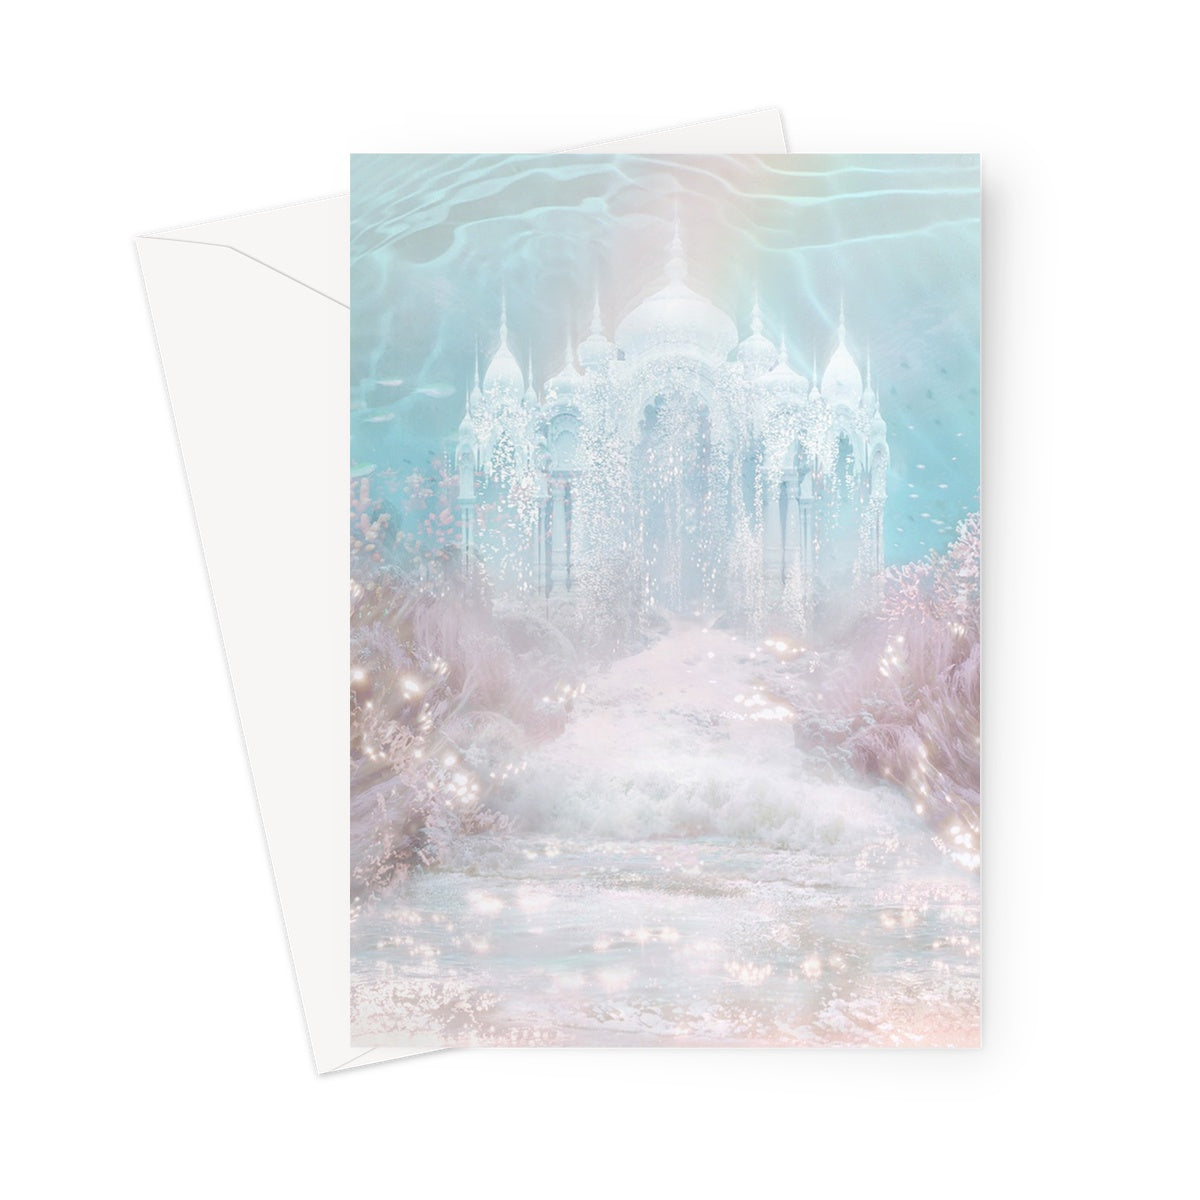 Temple of the Sea Greeting Card - Starseed Designs Inc.